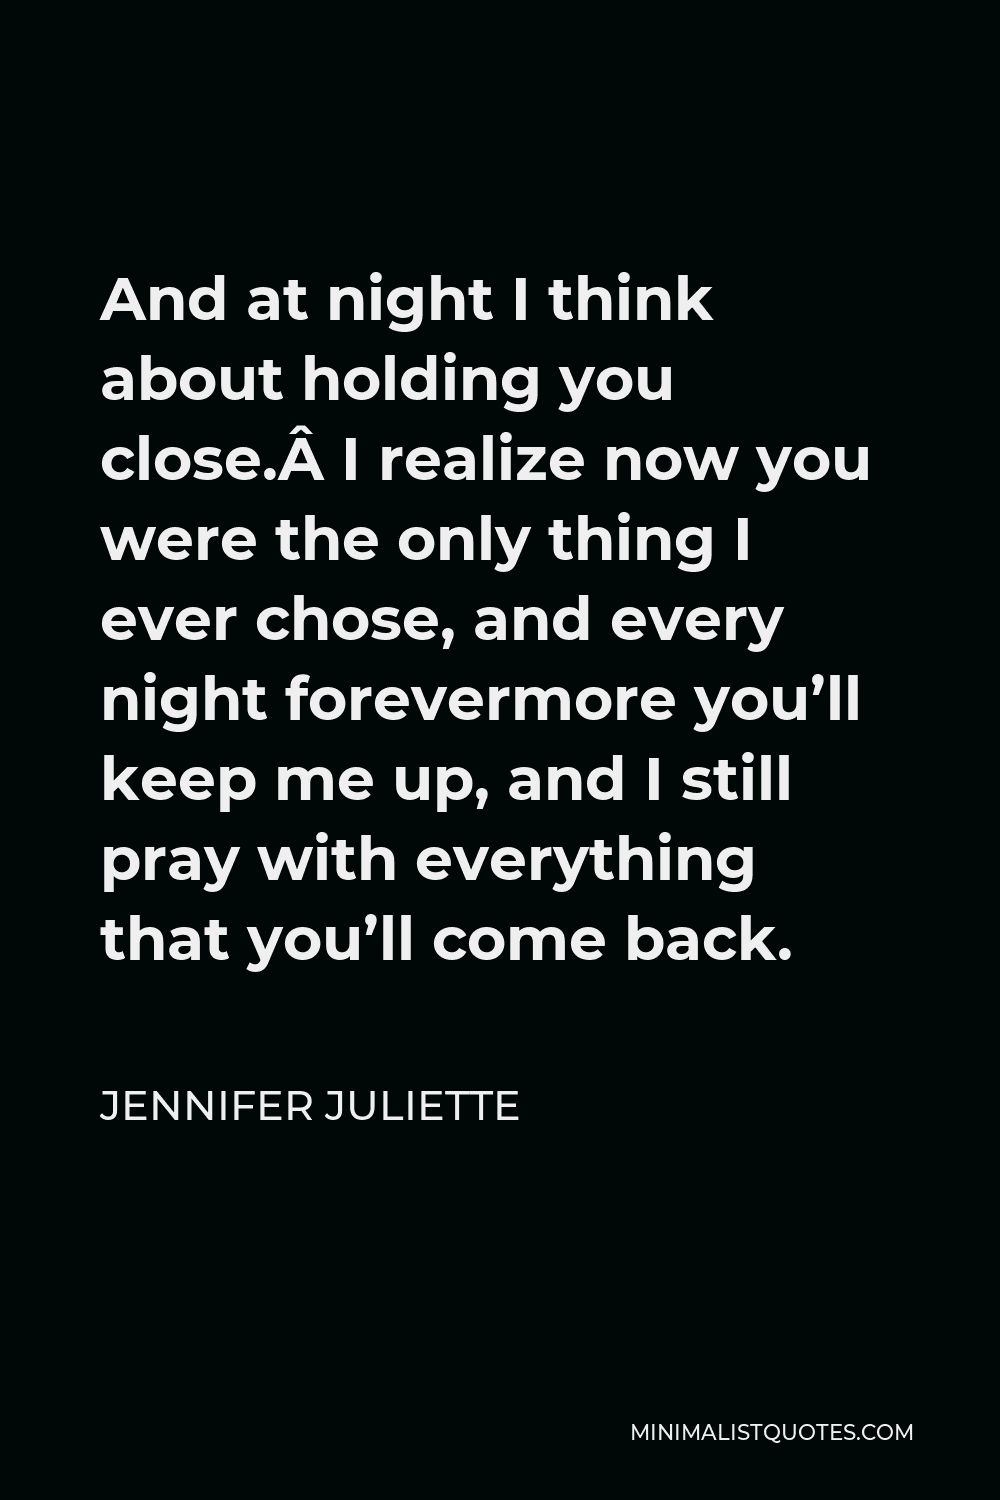 Jennifer Juliette Quote - And at night I think about holding you close. I realize now you were the only thing I ever chose, and every night forevermore you’ll keep me up, and I still pray with everything that you’ll come back.